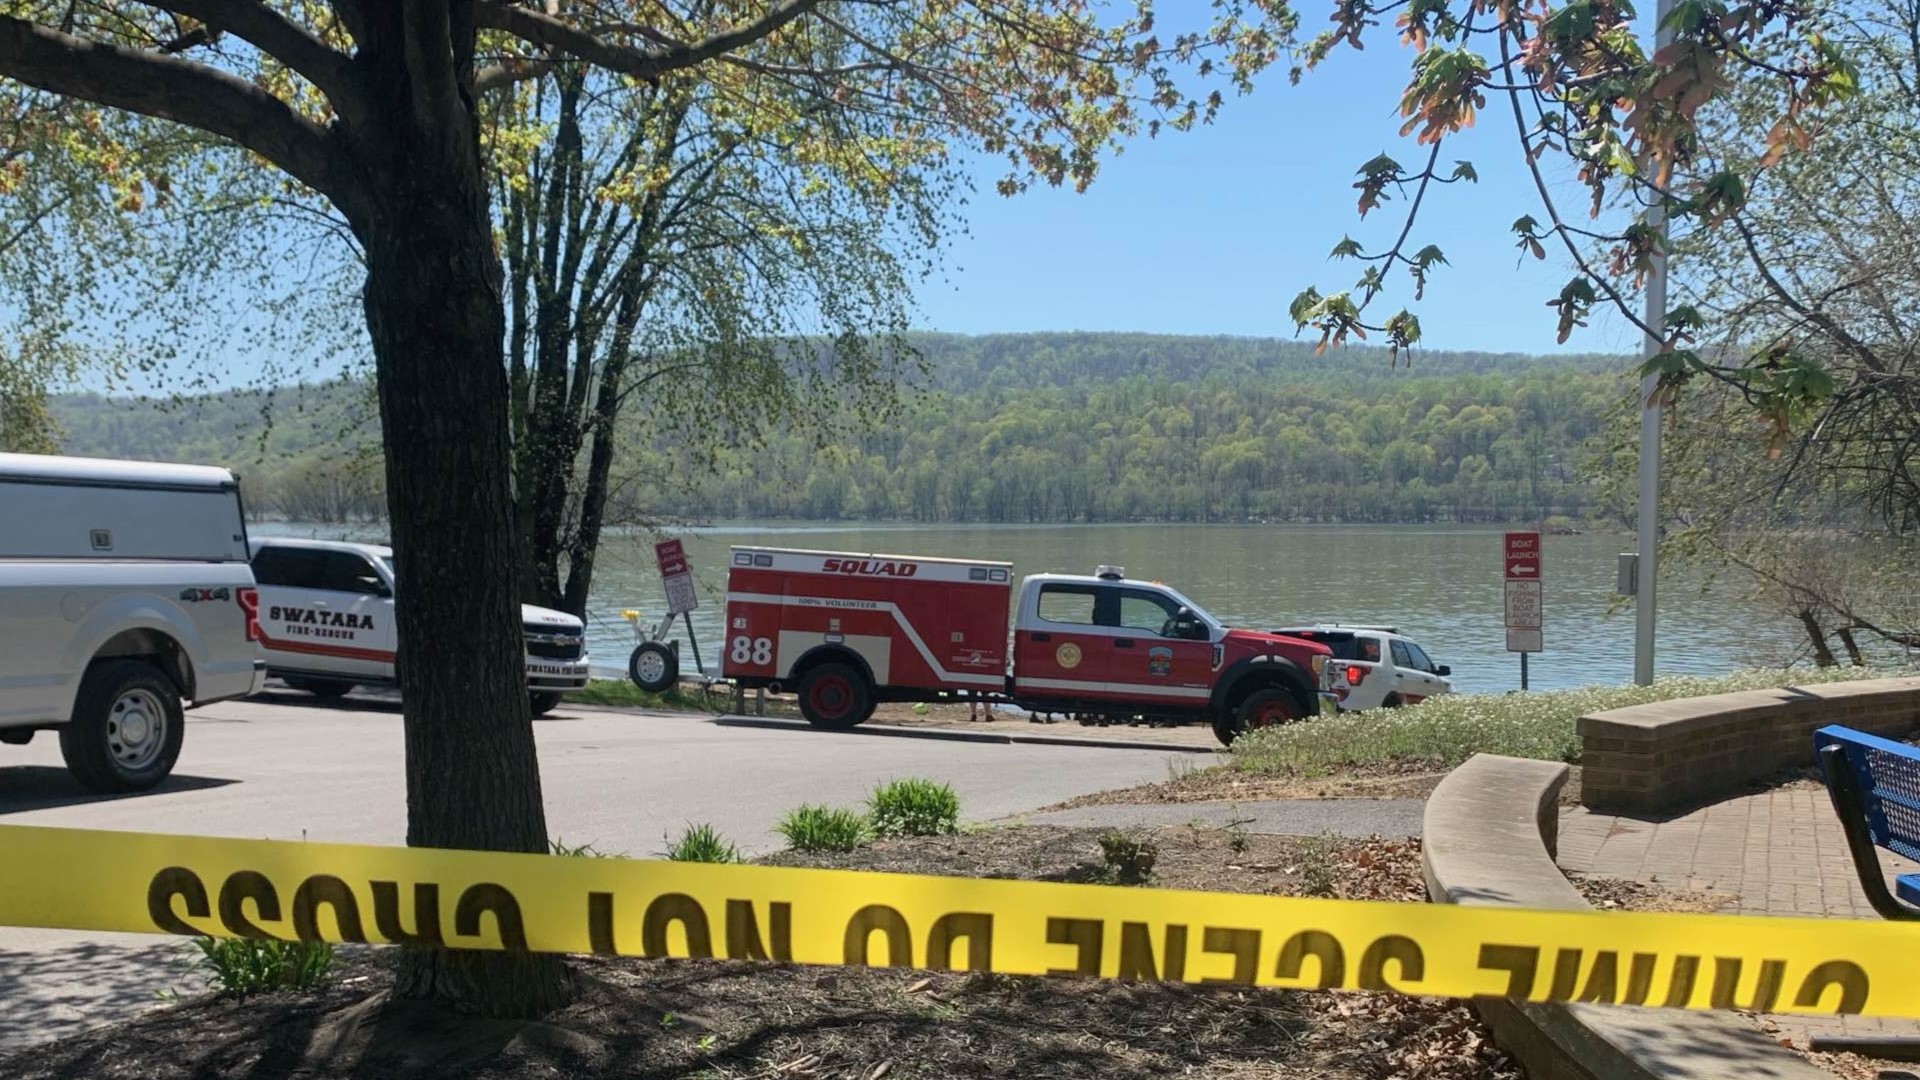 A City of Harrisburg spokesperson said two men had gone into the water near the Dock Street Dam. One was located alive and the other's body has been found.